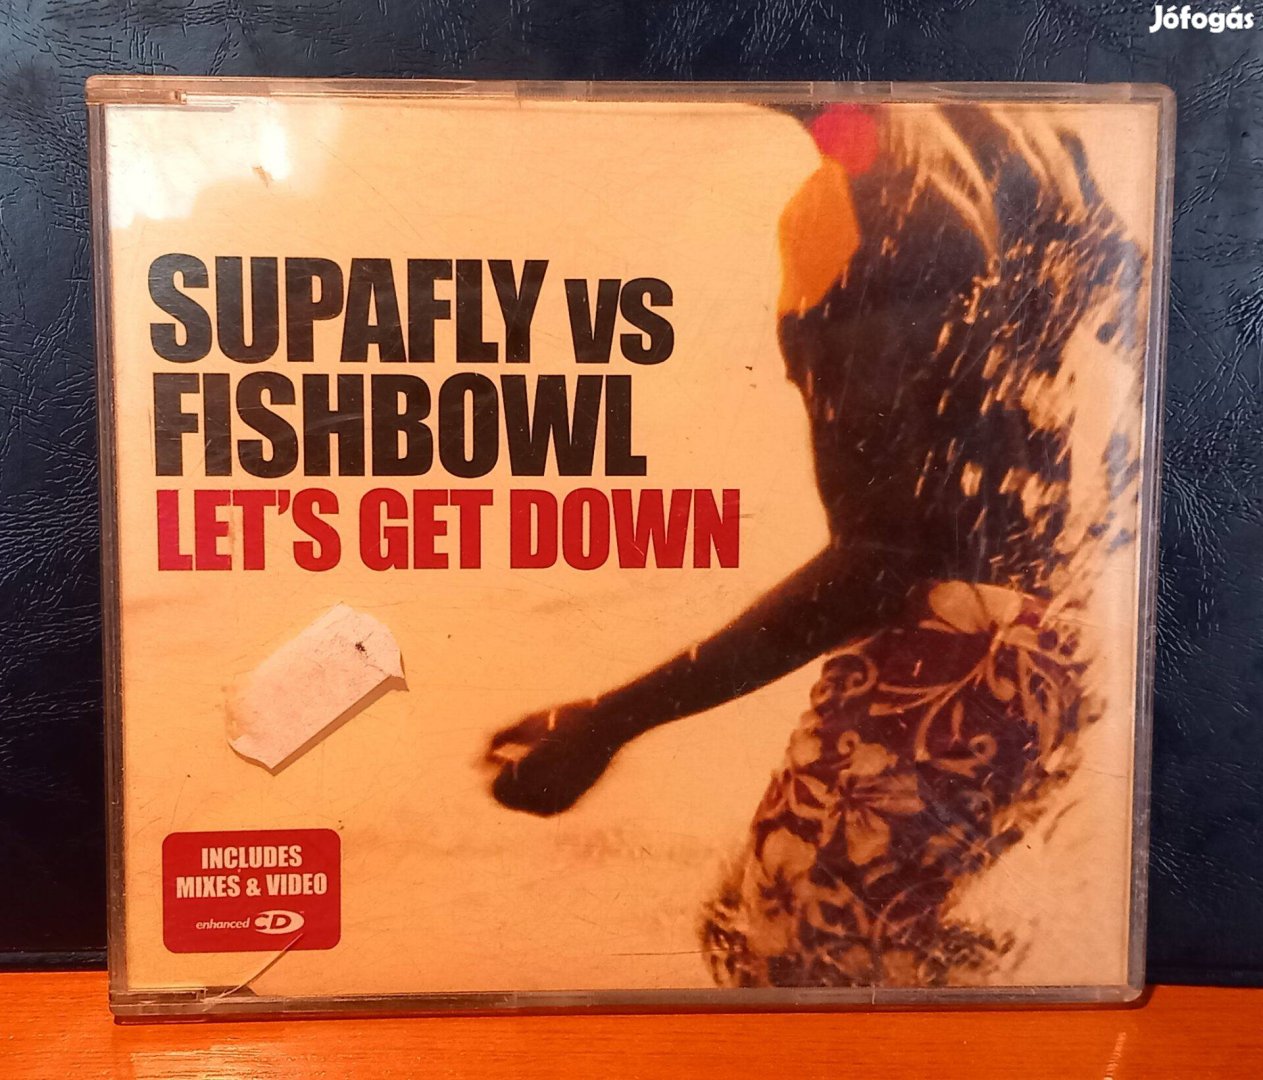 Supafly vs. Fishbowl - Let's get down [ Maxi CD ]